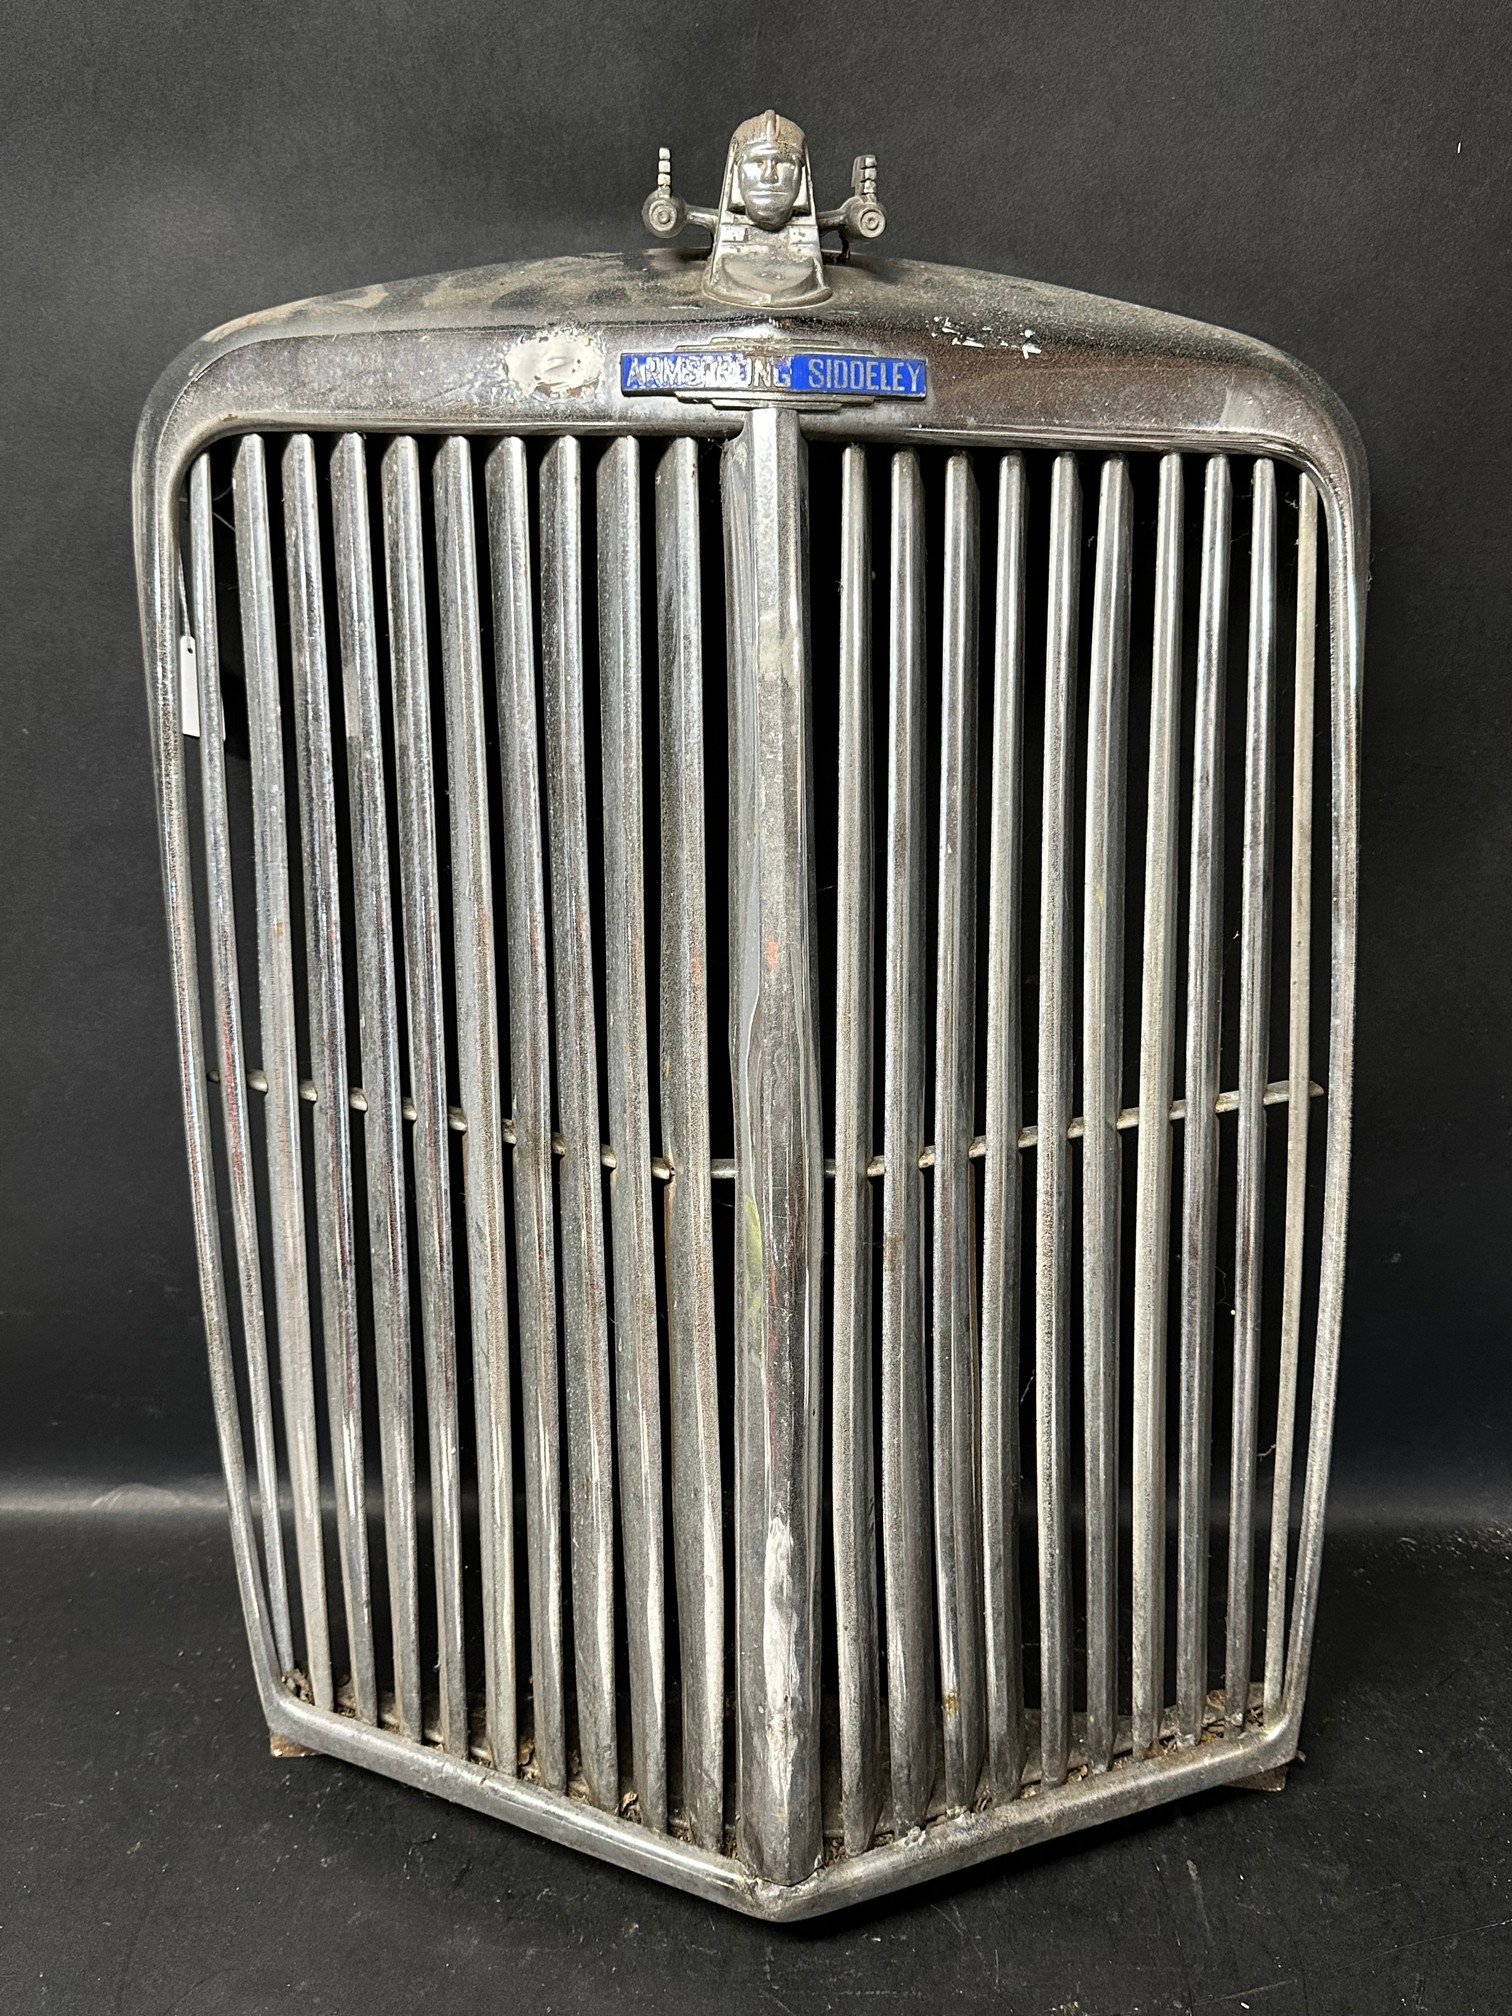 An Armstrong Siddeley radiator grille.